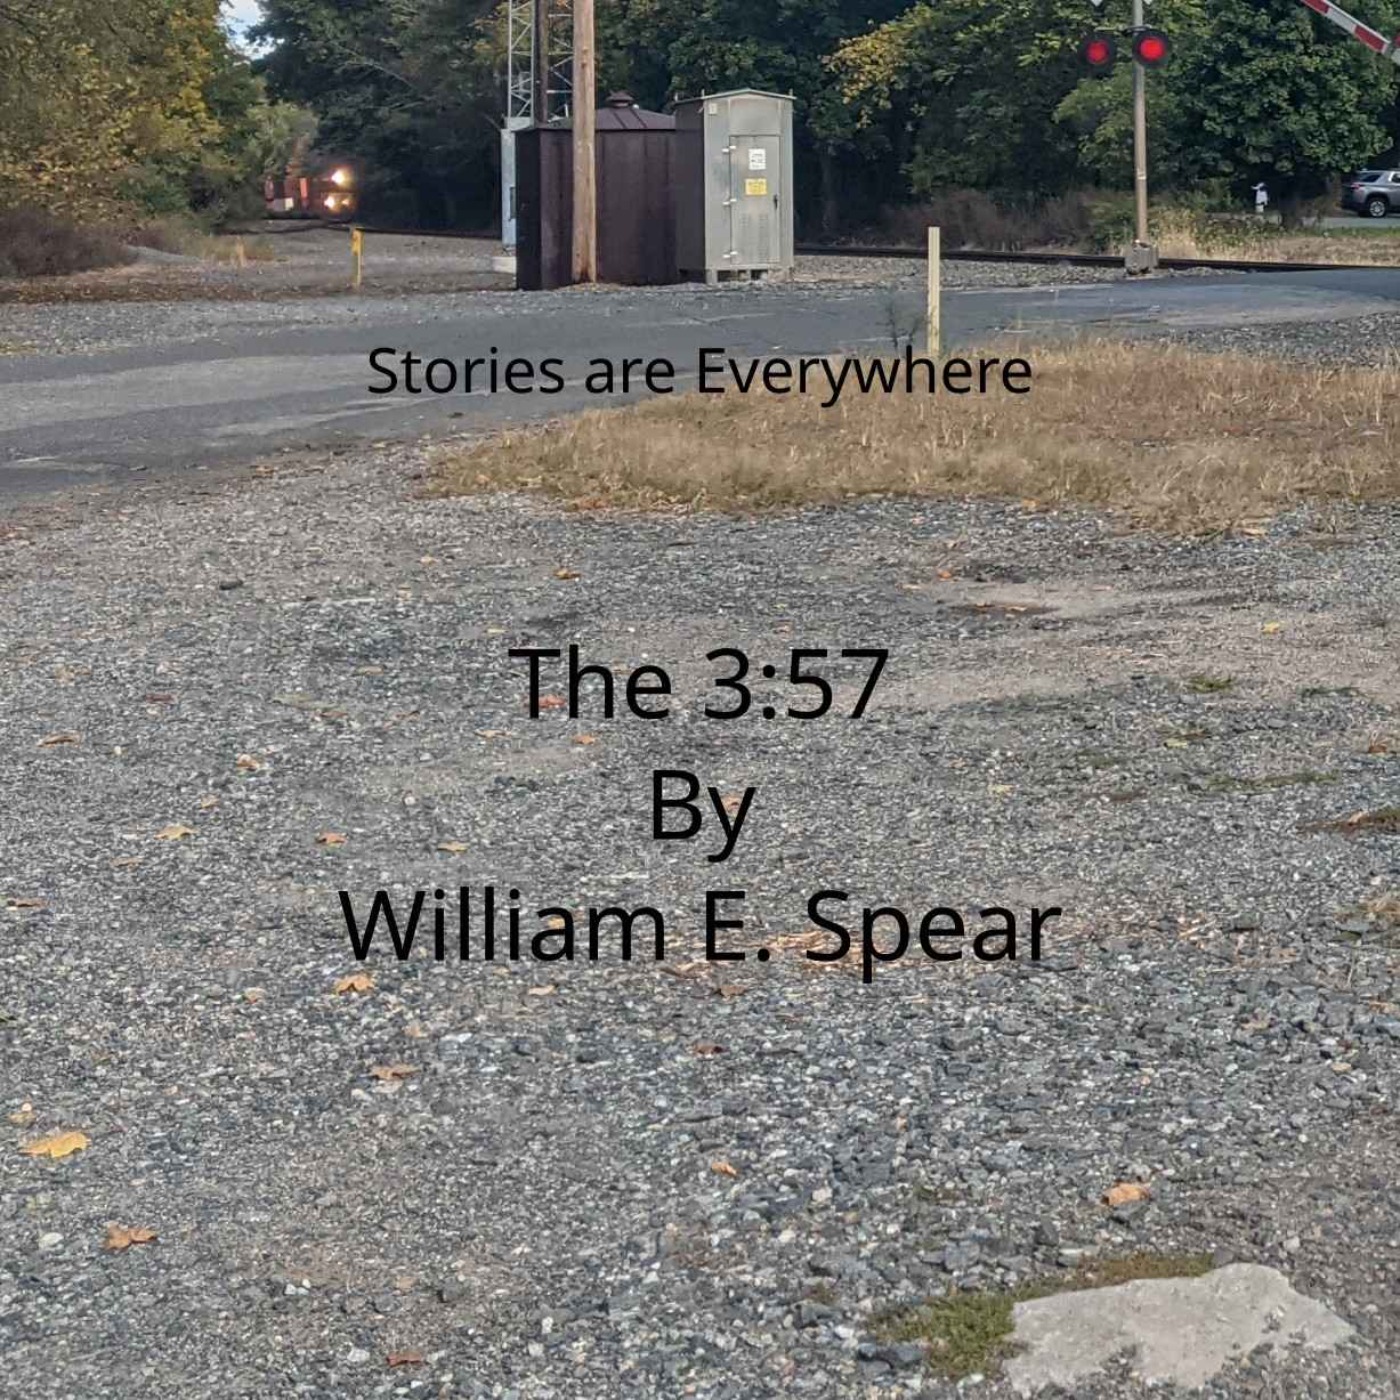 "    The 3:57 by William E. Spear " Podcast